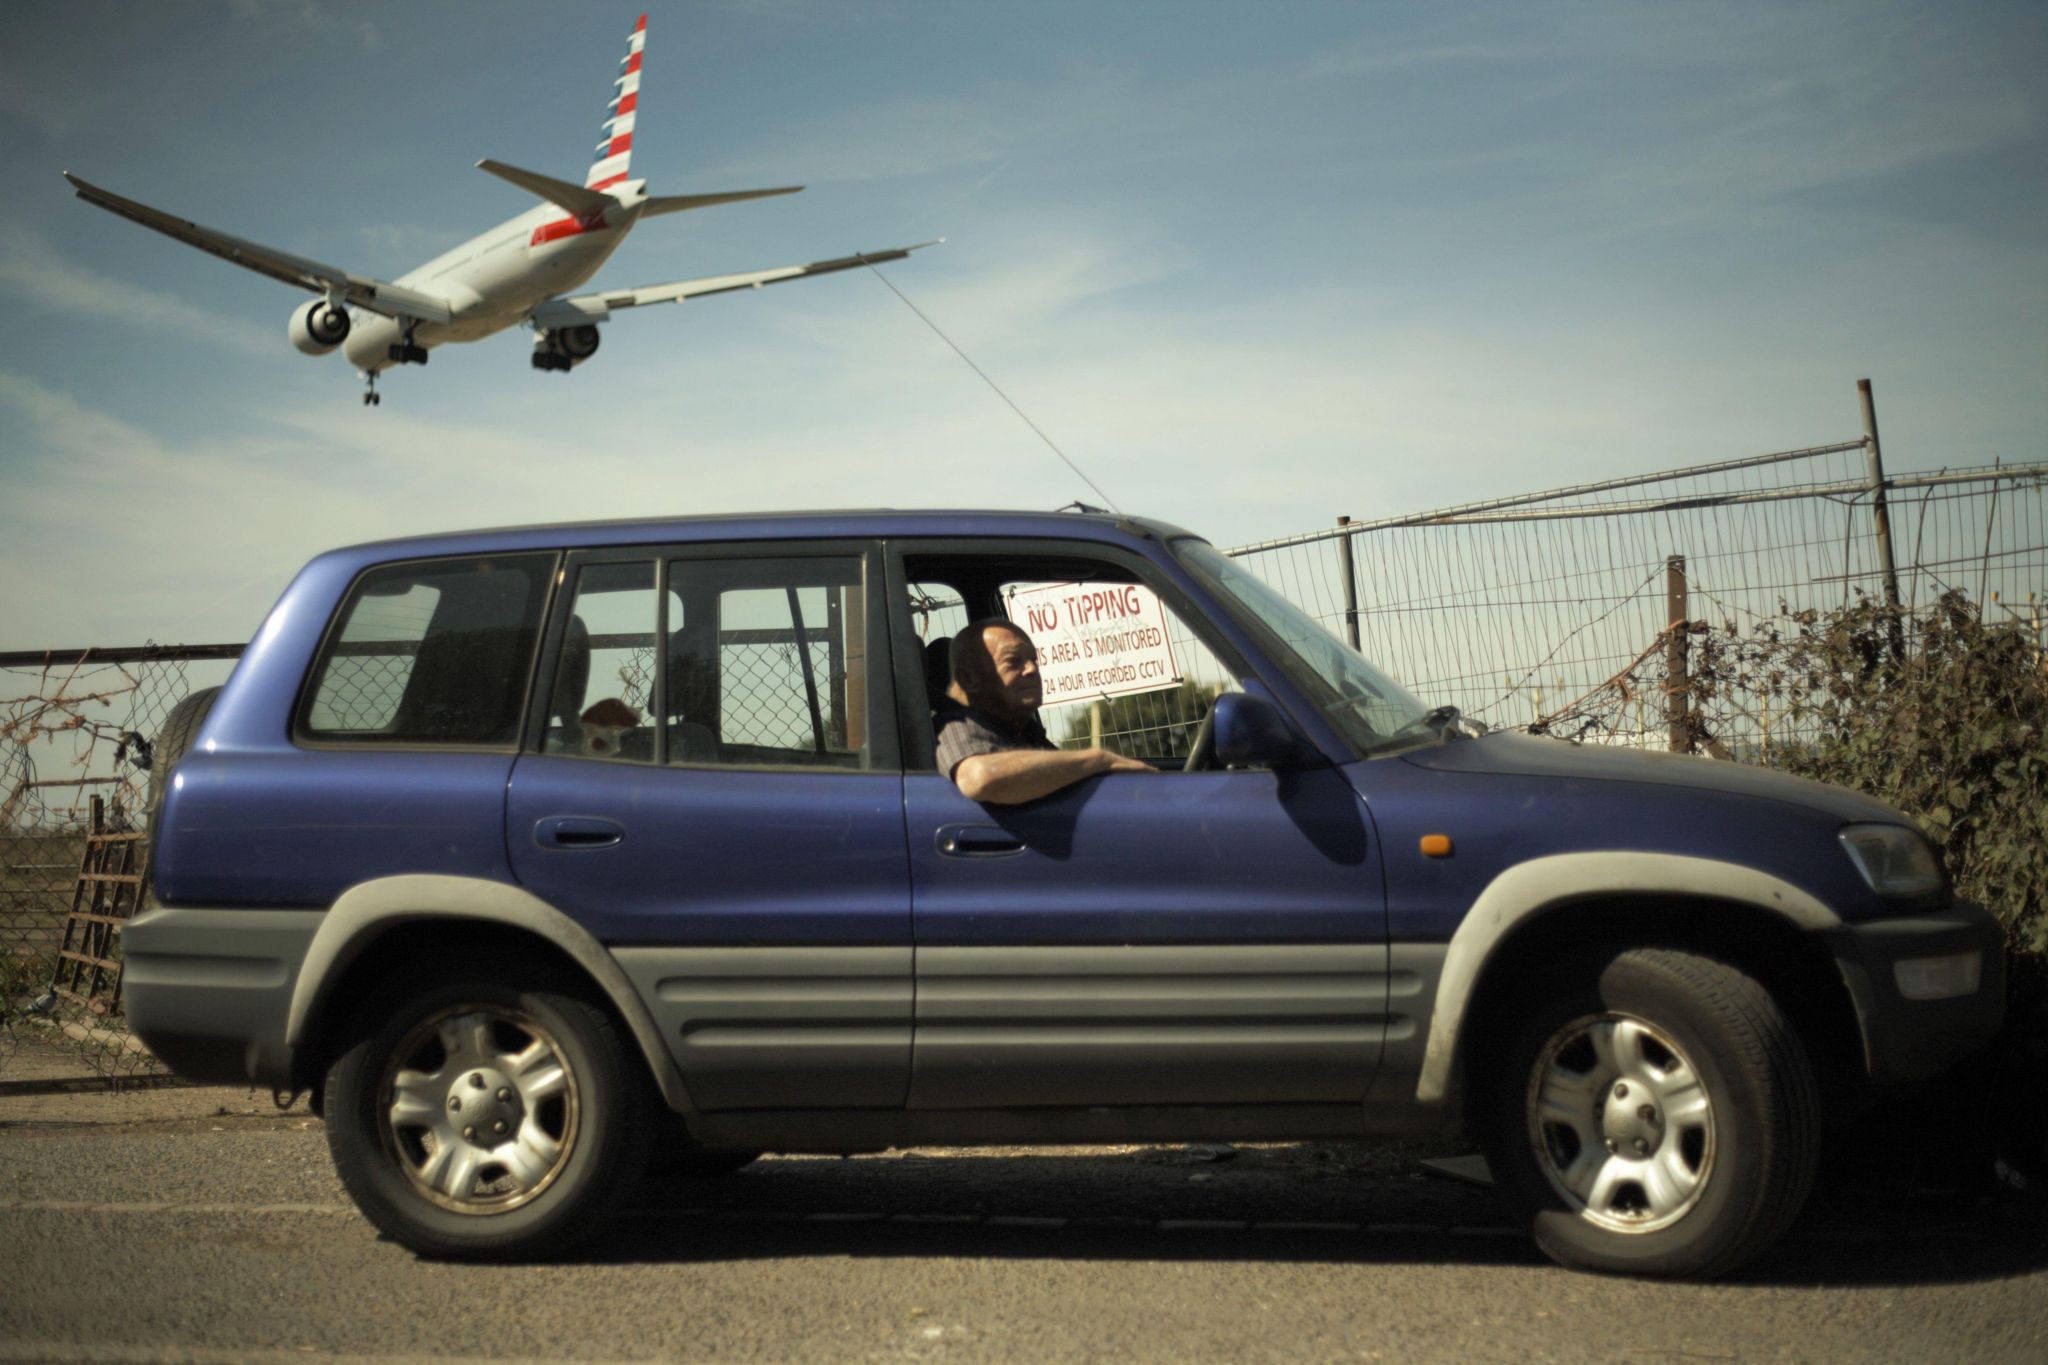 Man in car looks out of the window as a flight passes overhead